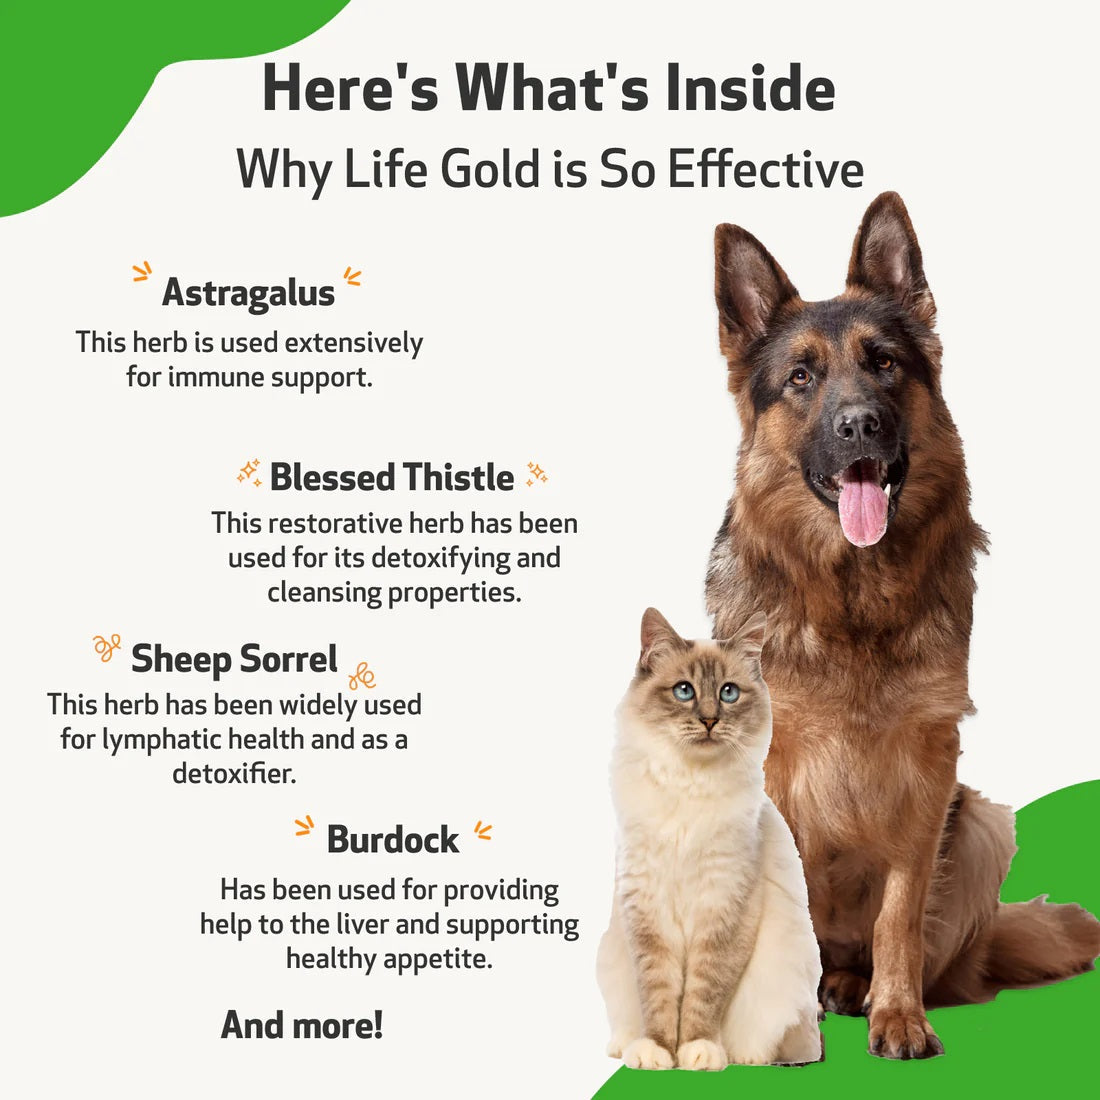 Pet Wellbeing - Life Gold - Trusted Care for Dog Cancer